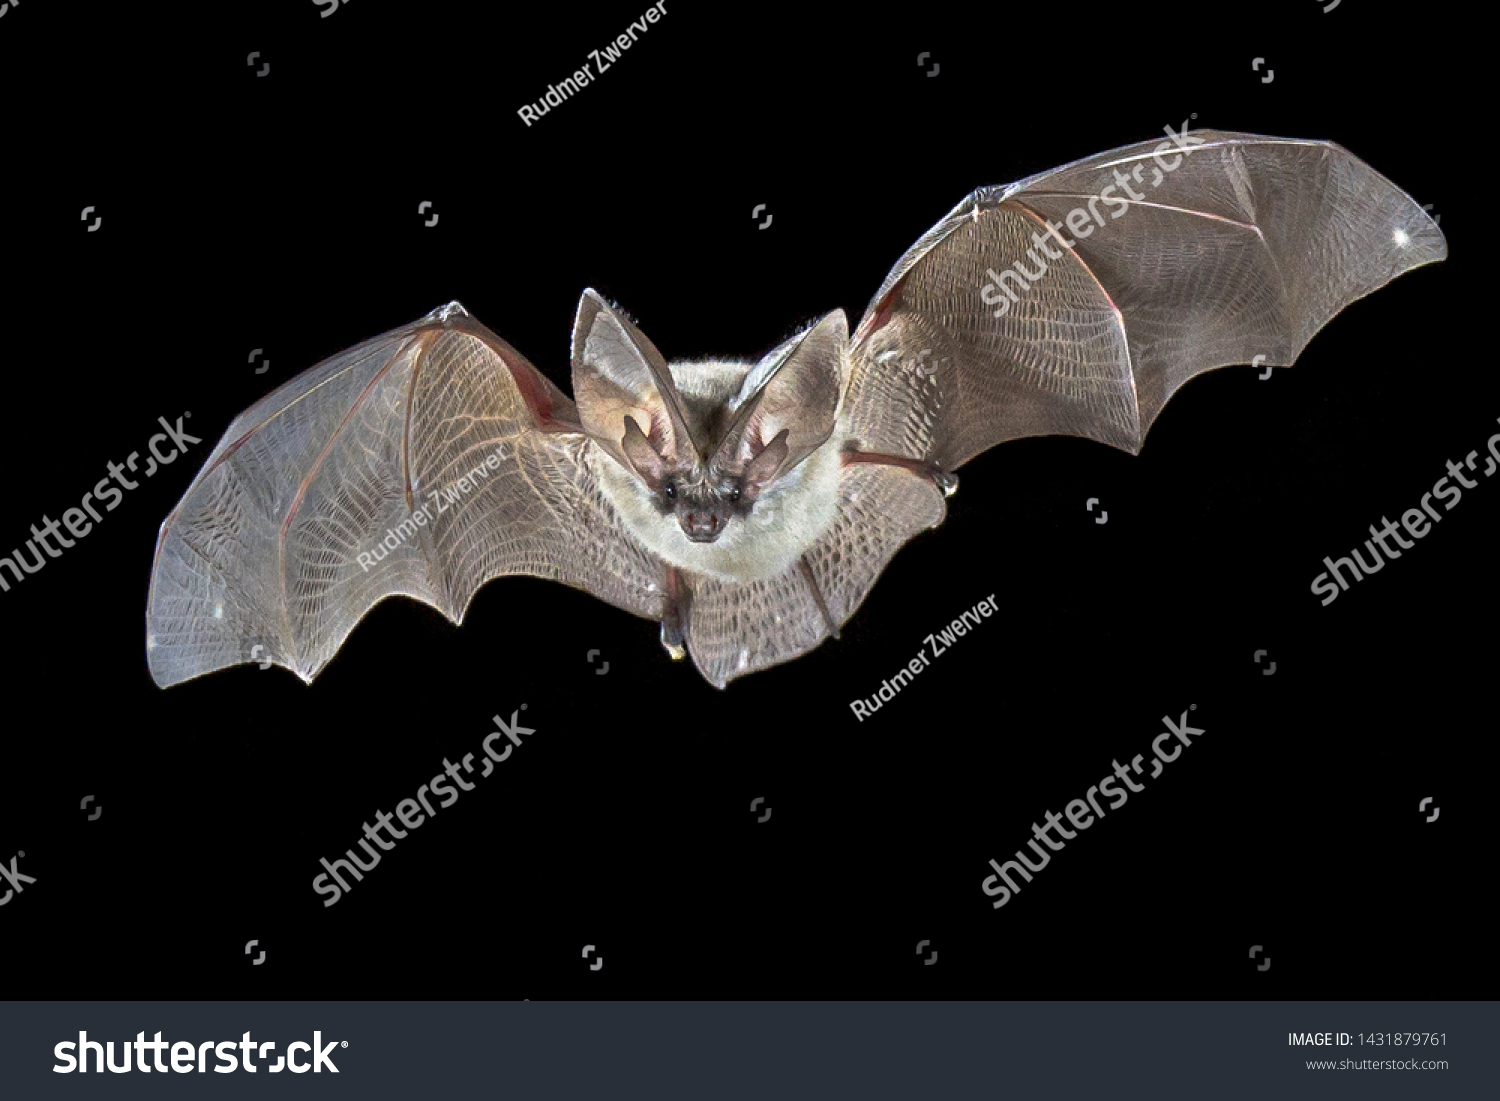 Flying bat isolated on black background. The grey long-eared bat (Plecotus austriacus) is a fairly large European bat. It has distinctive ears, long and with a distinctive fold. It hunts in woodland #1431879761